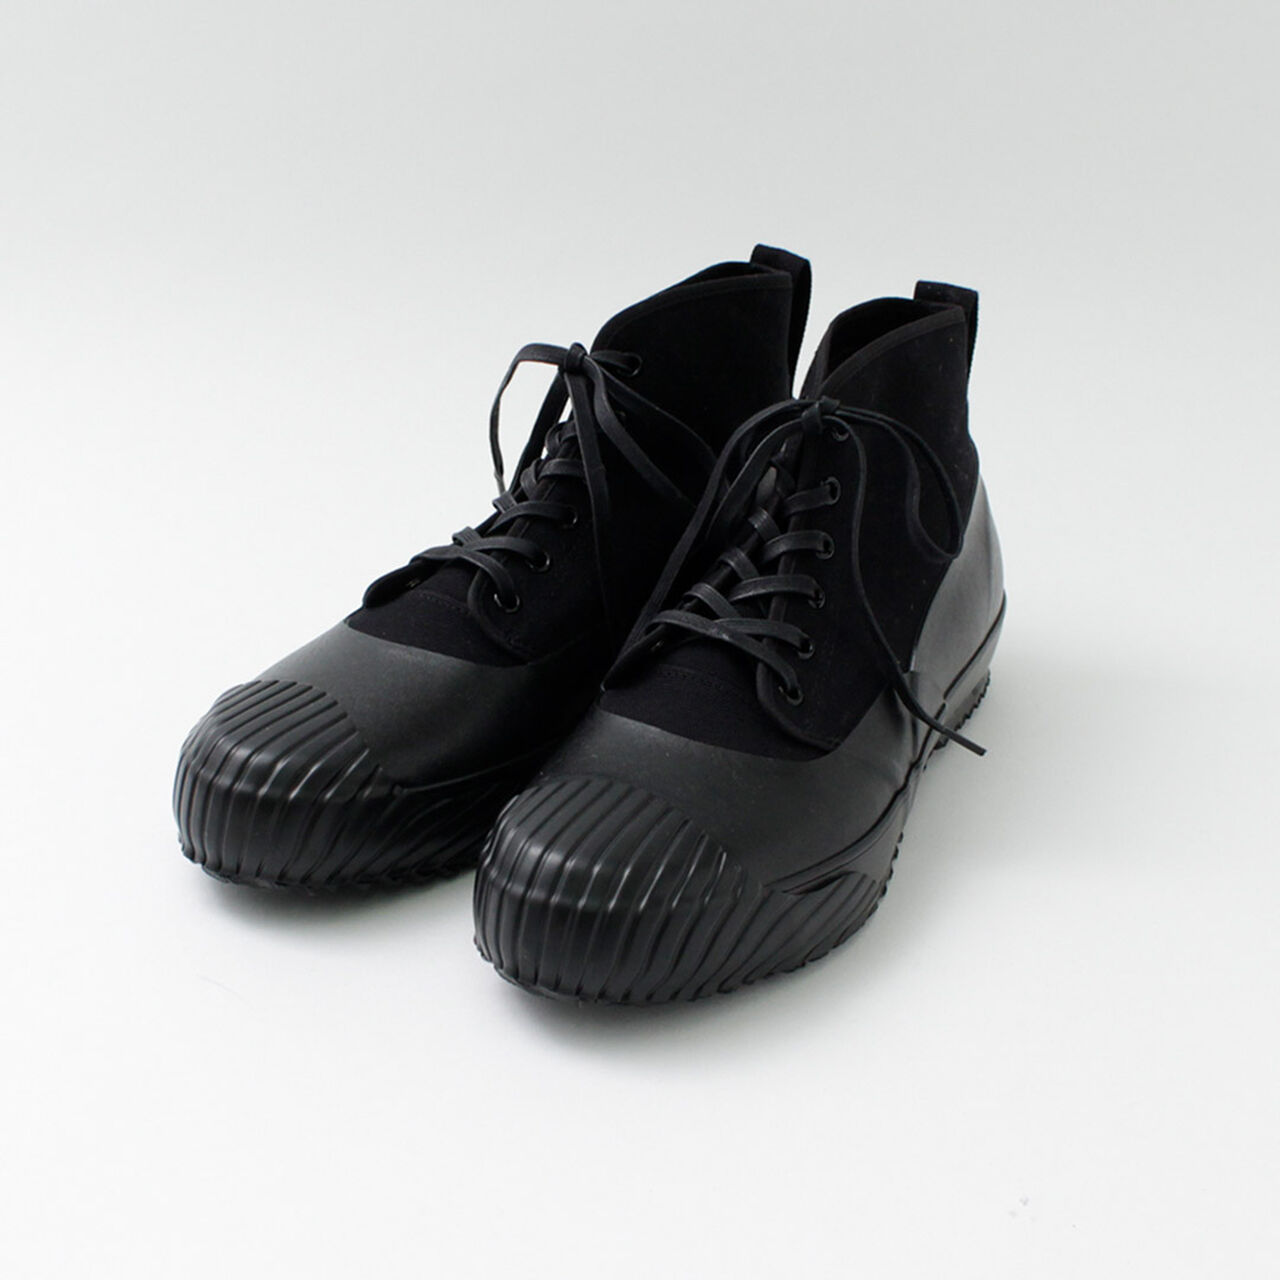 All Weather RF Sneakers,Black, large image number 0